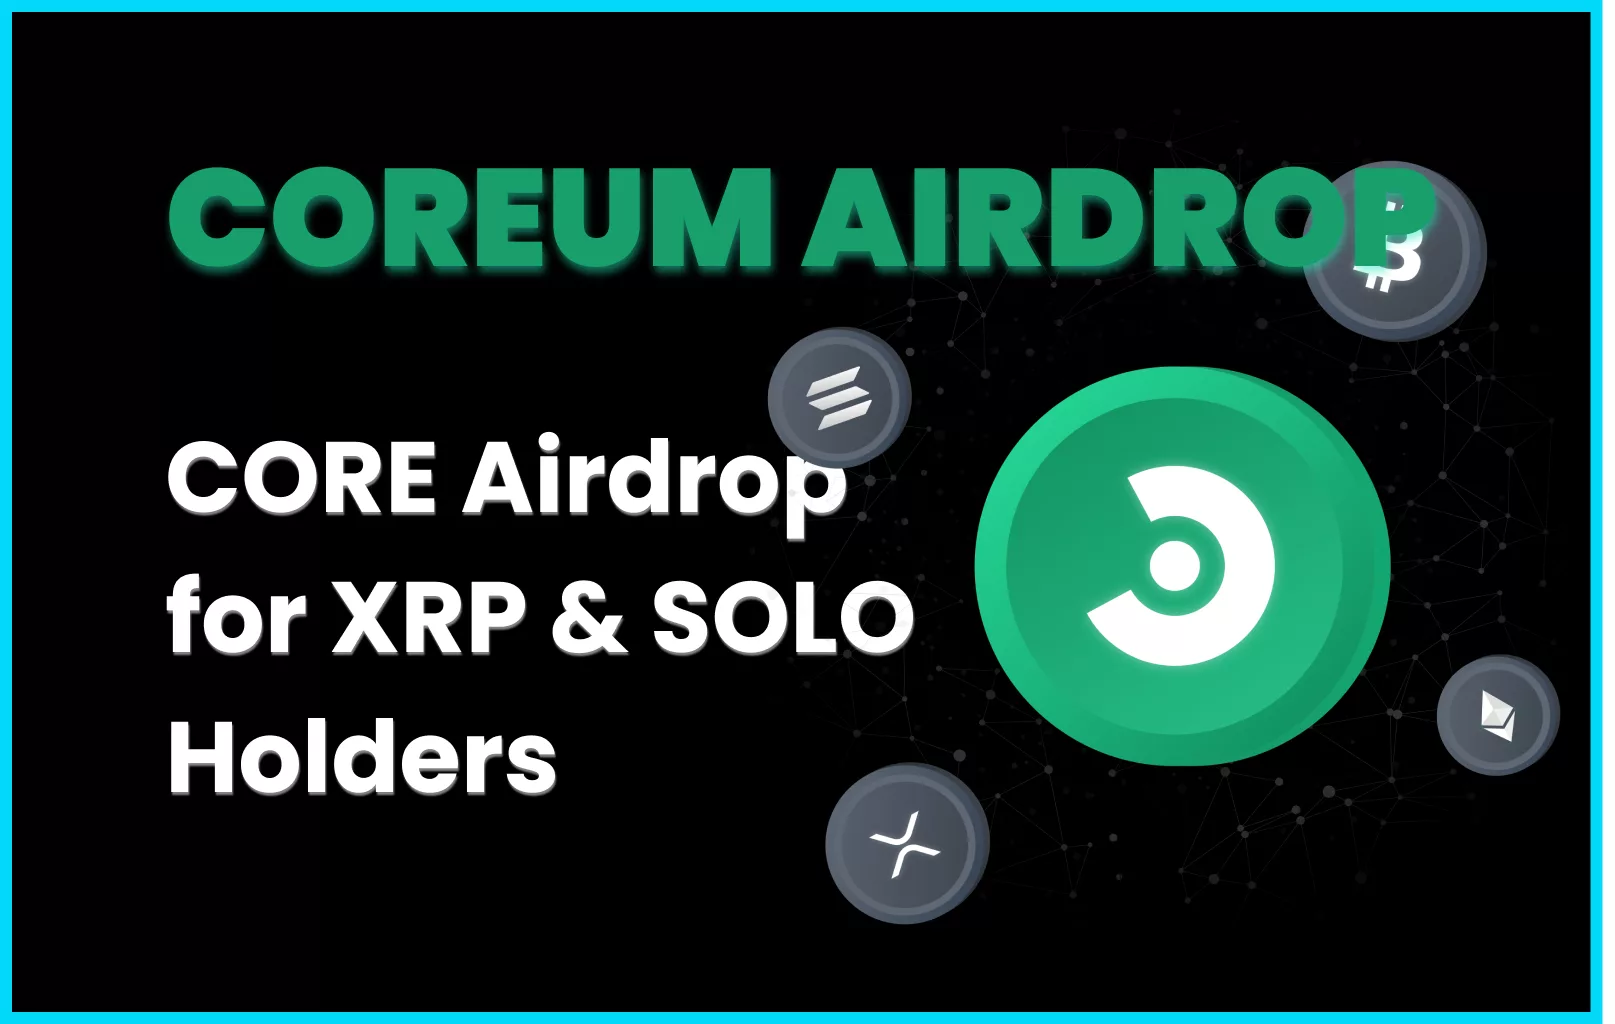 How to Participate in the Coreum ($CORE) Airdrop